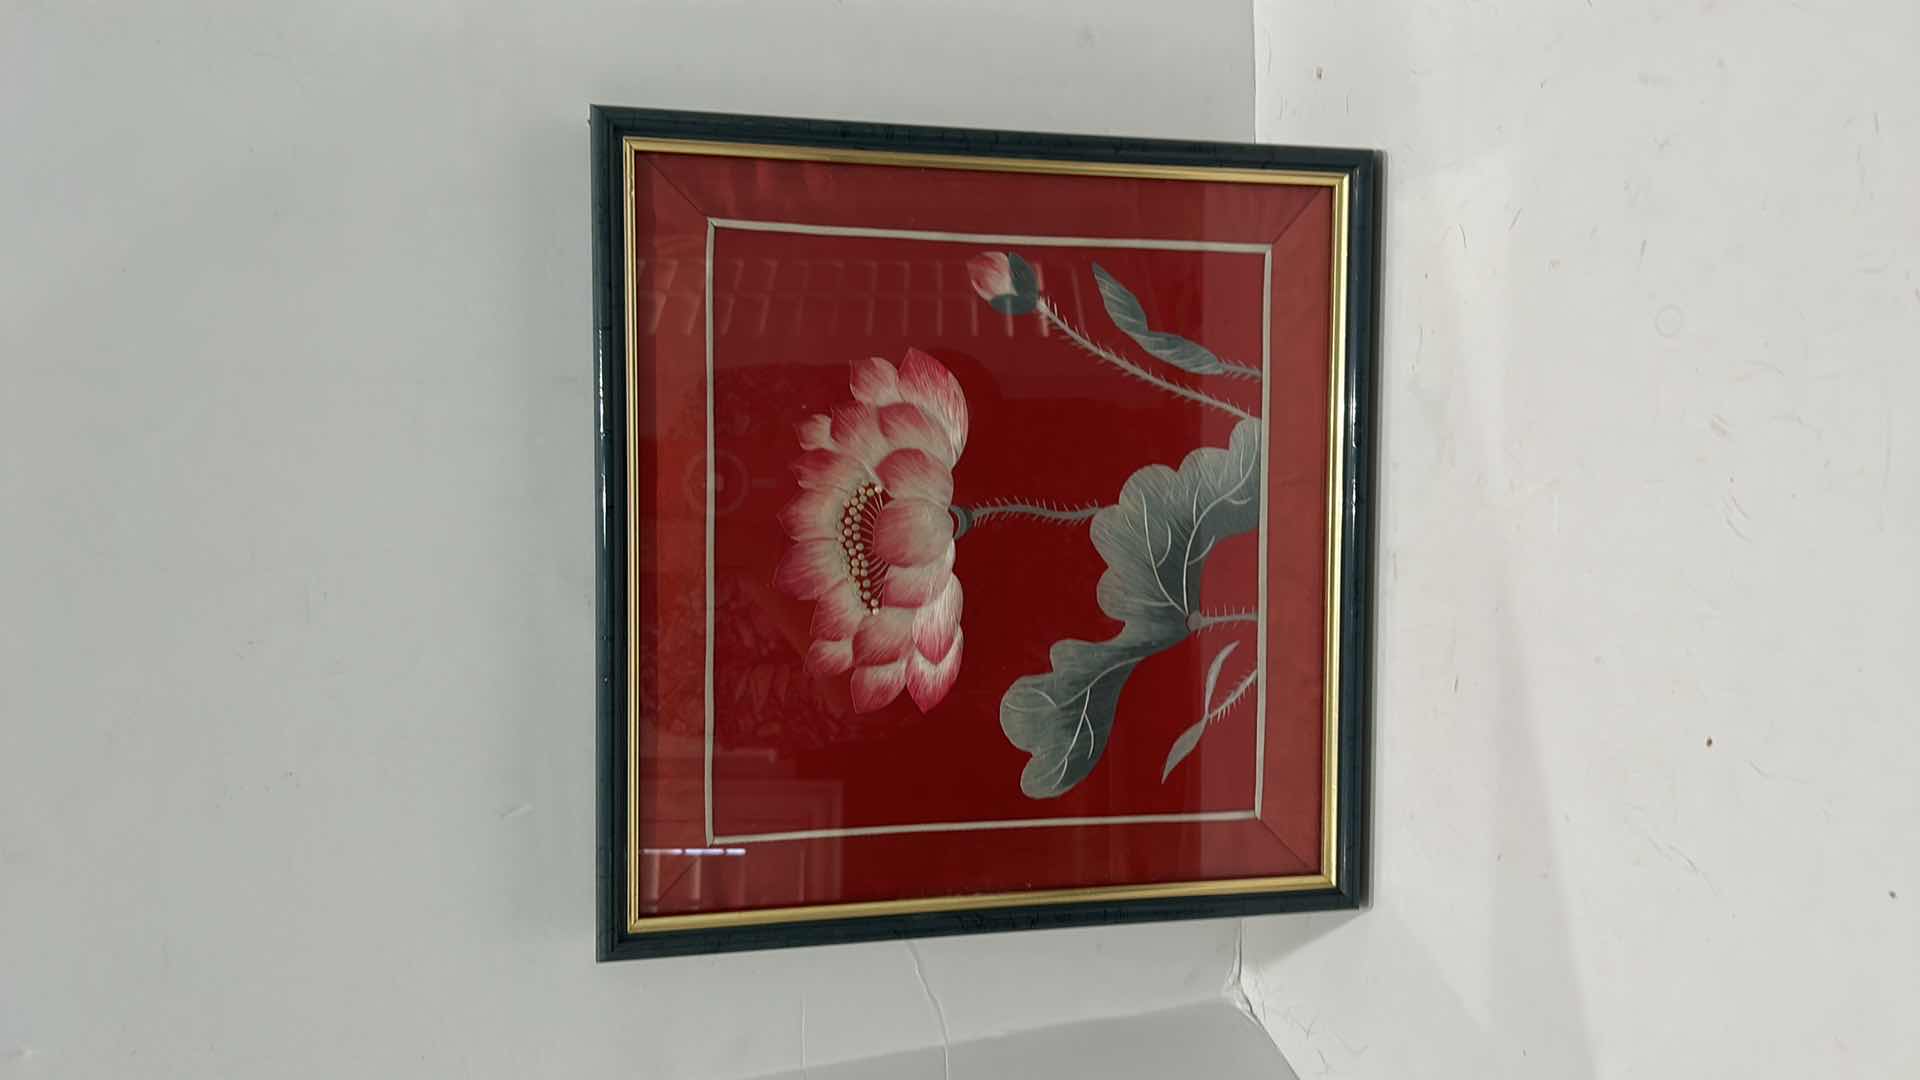 Photo 5 of ANTIQUE CHINESE TEXTILE FABRIC, SILK WITH SILK THREAD HAND EMBROIDERY ARTWORK FRAMED 13 1/2” x 13 1/2”